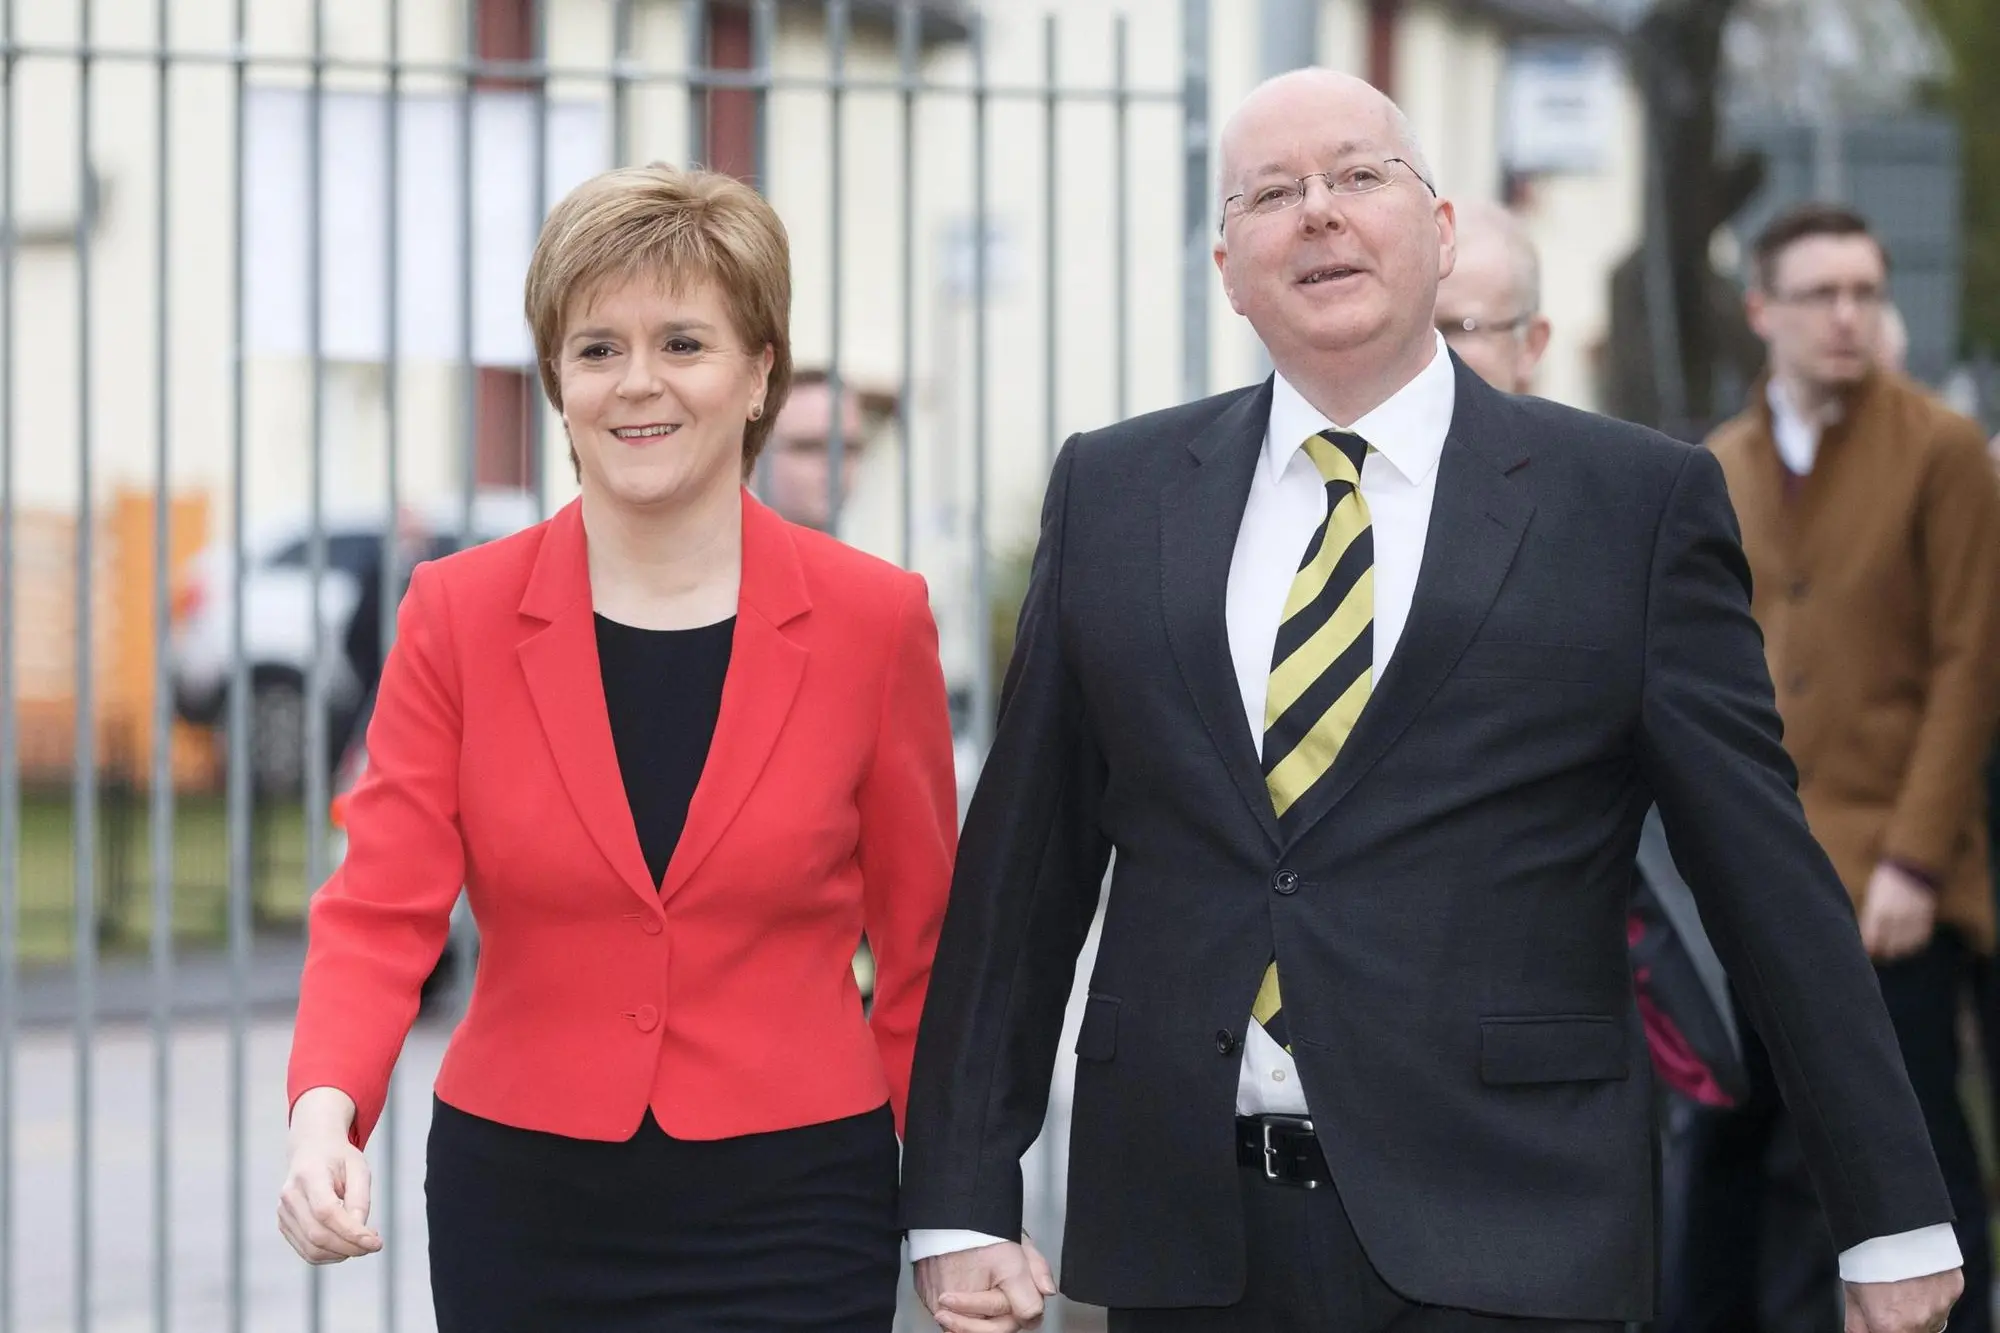 SNP Leader Nicola Sturgeon (L) arrives with her husband Peter Murrell (R), current CEO of the SNP, to cast her vote in the Scottish Parliamentary election, at Broomhoouse Community Hall in Glasgow, Scotland, 05 May 2016. ANSA/ROBERT PERRY